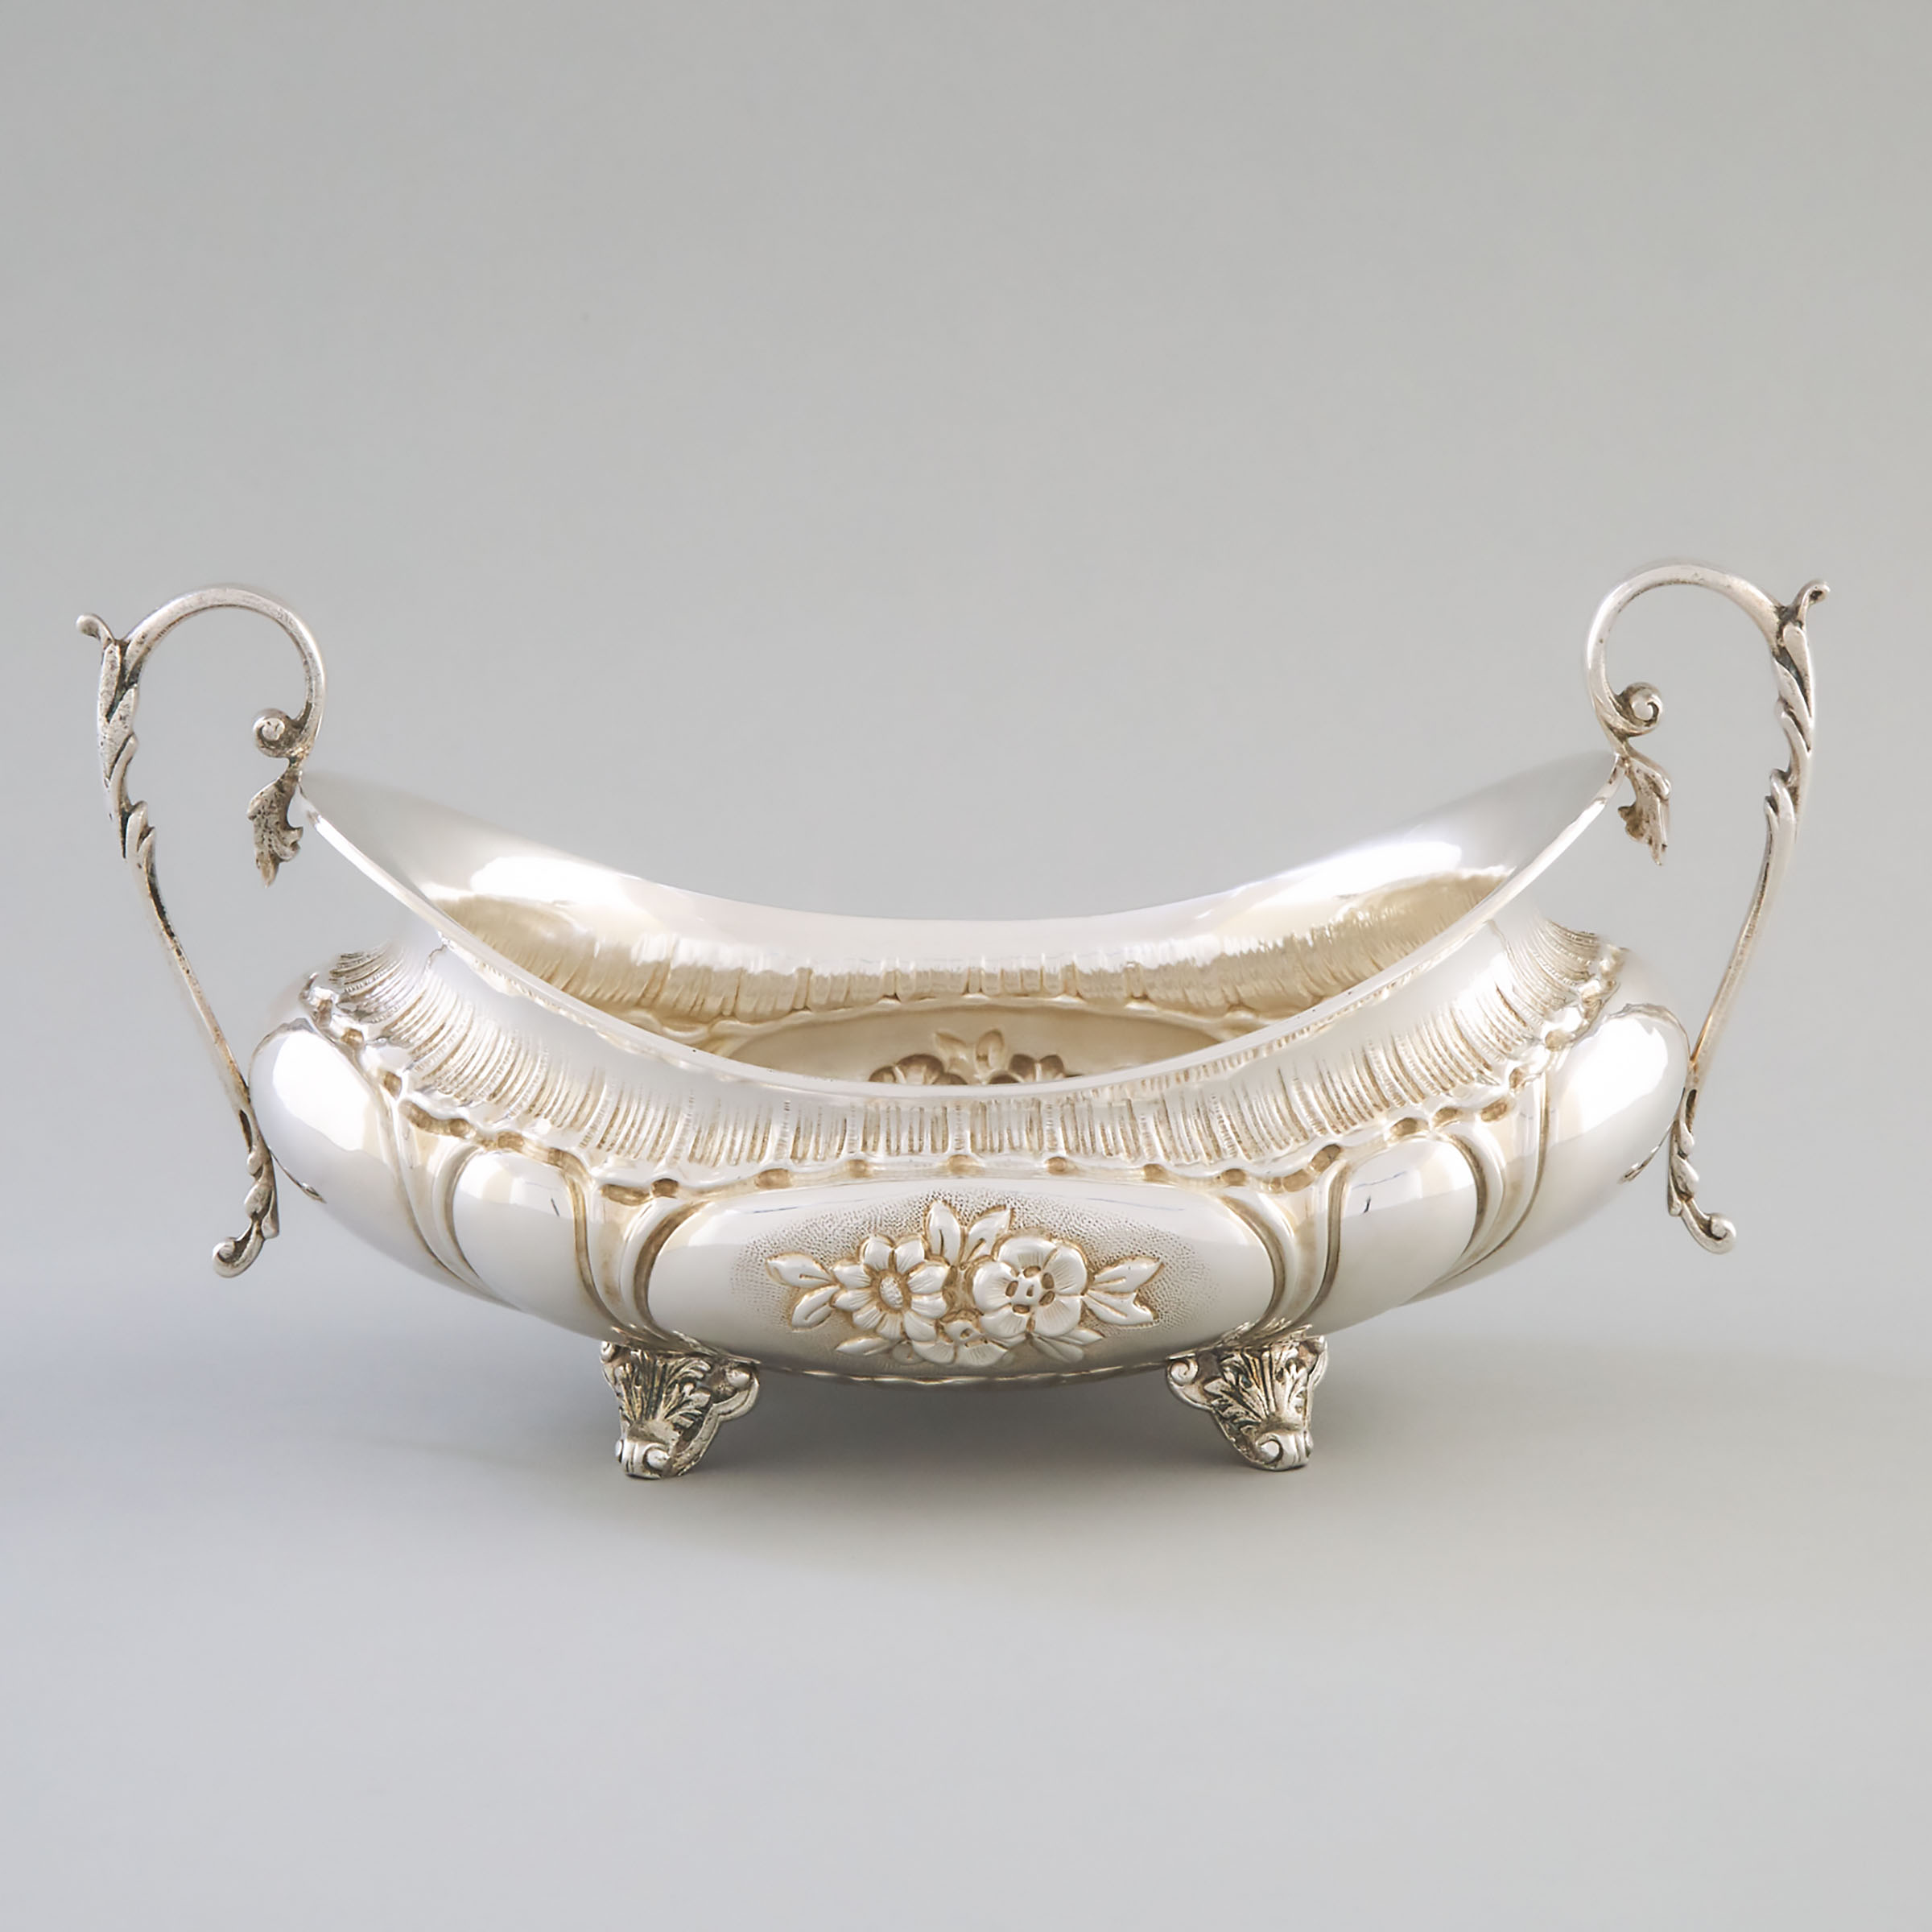 Continental Silver Two-Handled Oval Centrepiece Bowl, 20th century